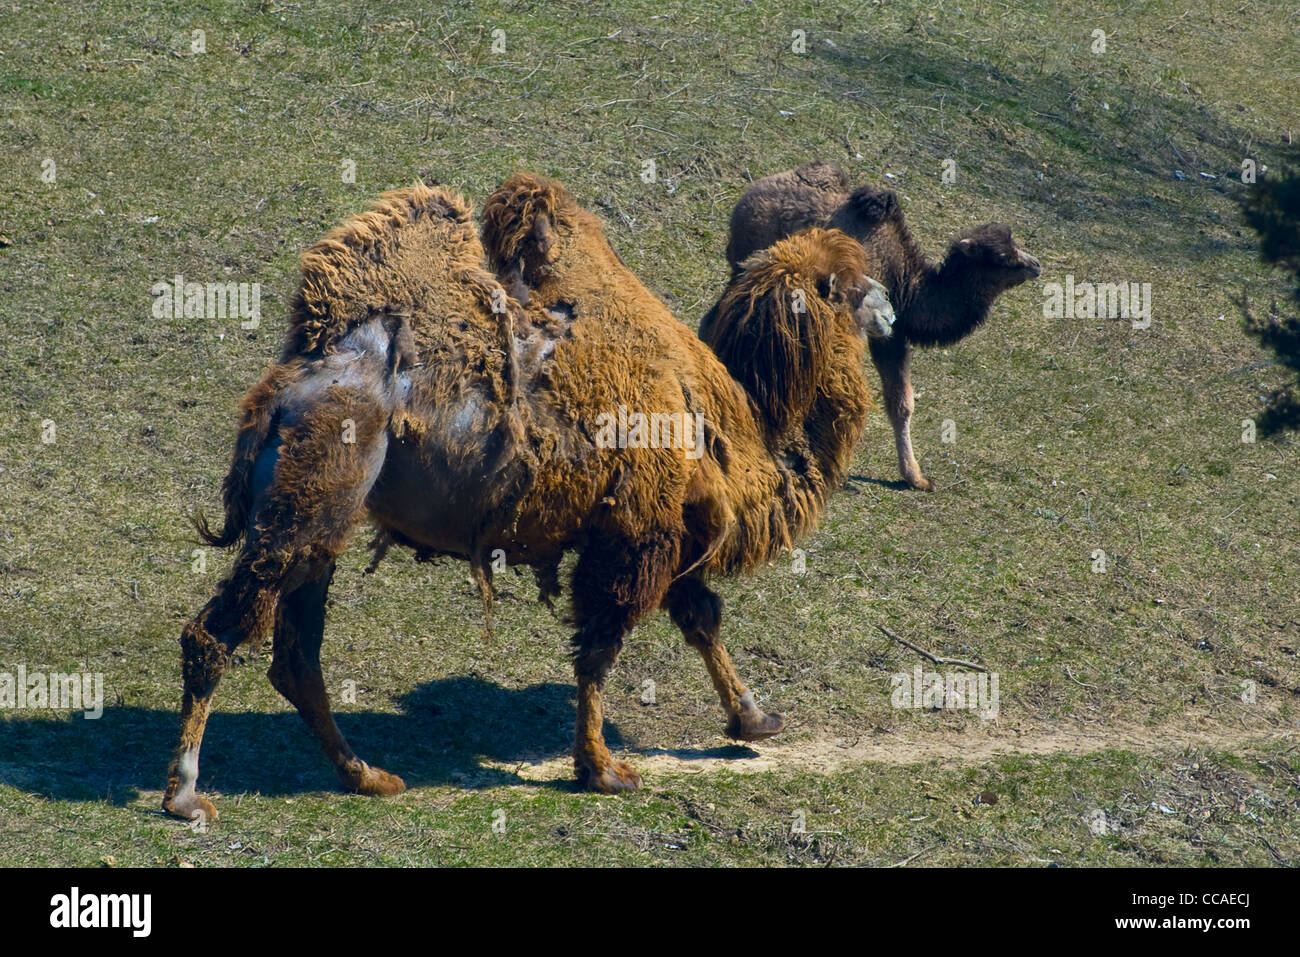 Bactrian Camel or Camelus Bactrianus and Offspring Stock Photo